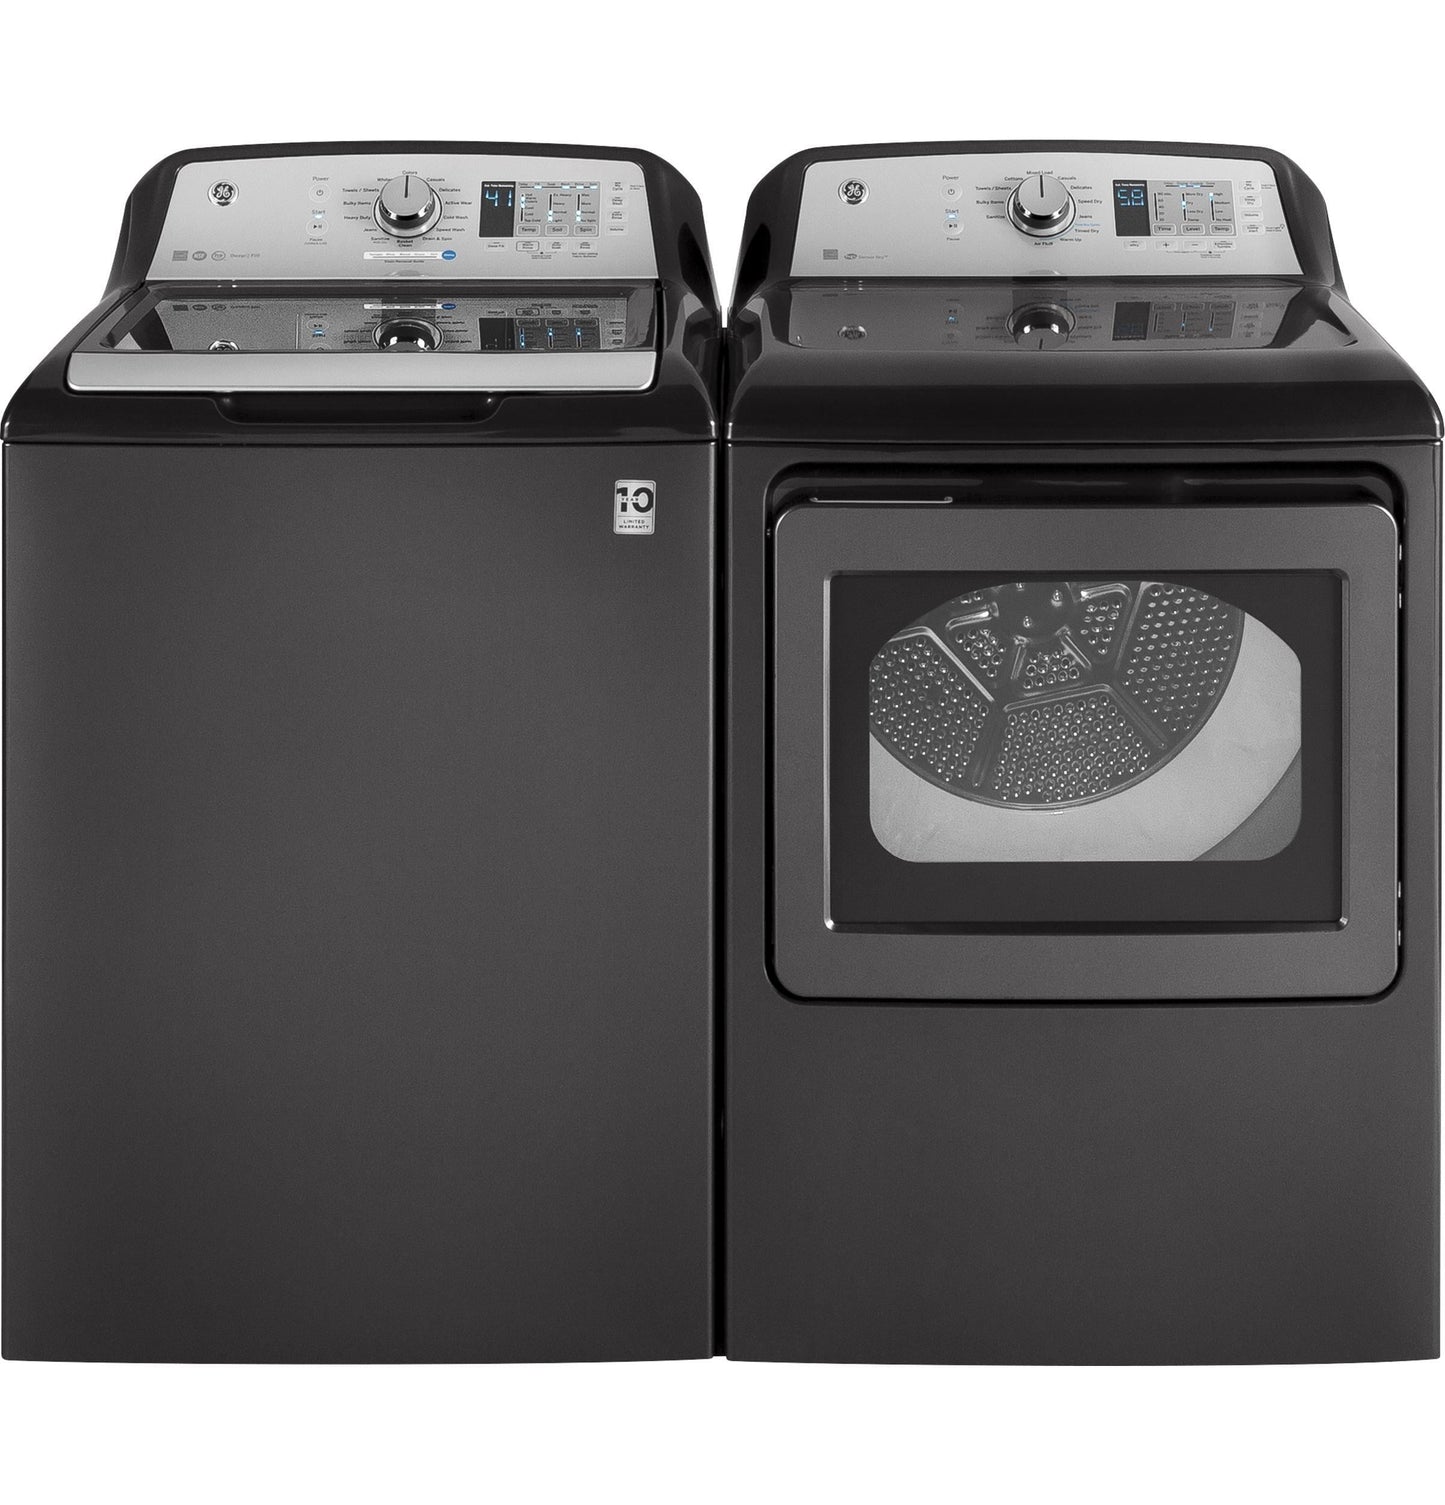 Ge Appliances GTW685BPLDG Ge® 4.5 Cu. Ft. Capacity Washer With Stainless Steel Basket